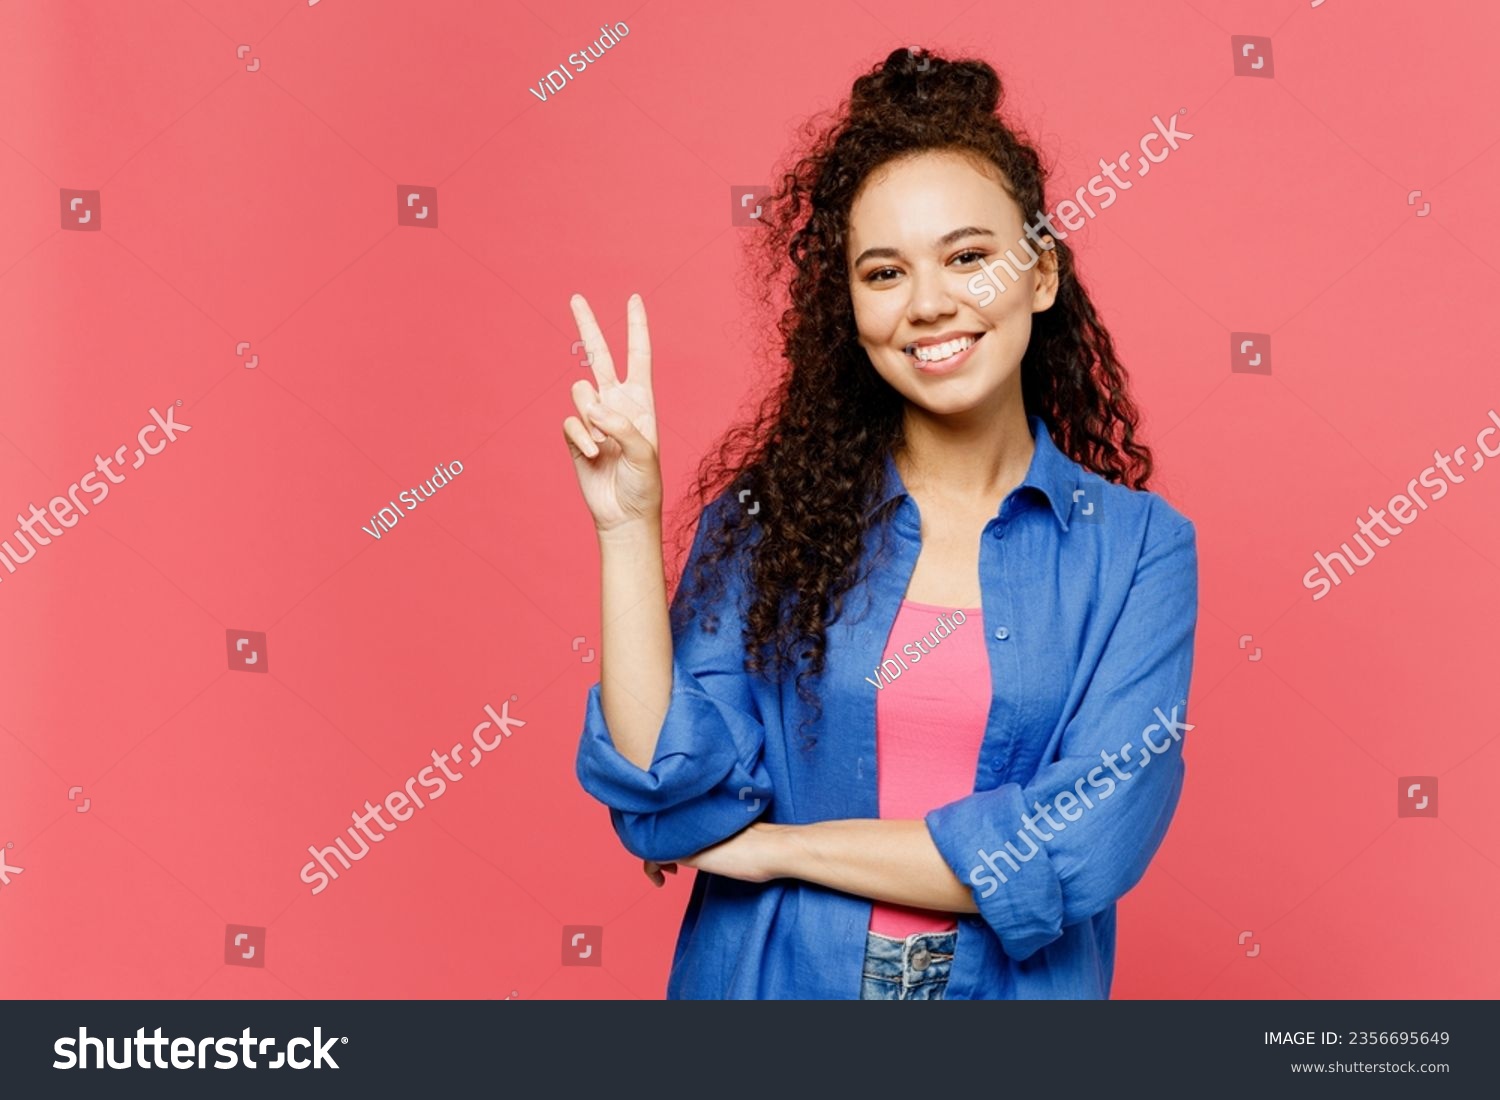 Young smiling happy cheerful woman of African American ethnicity she wear blue shirt casual clothes showing victory sign look camera isolated on plain pastel pink background studio. Lifestyle concept #2356695649